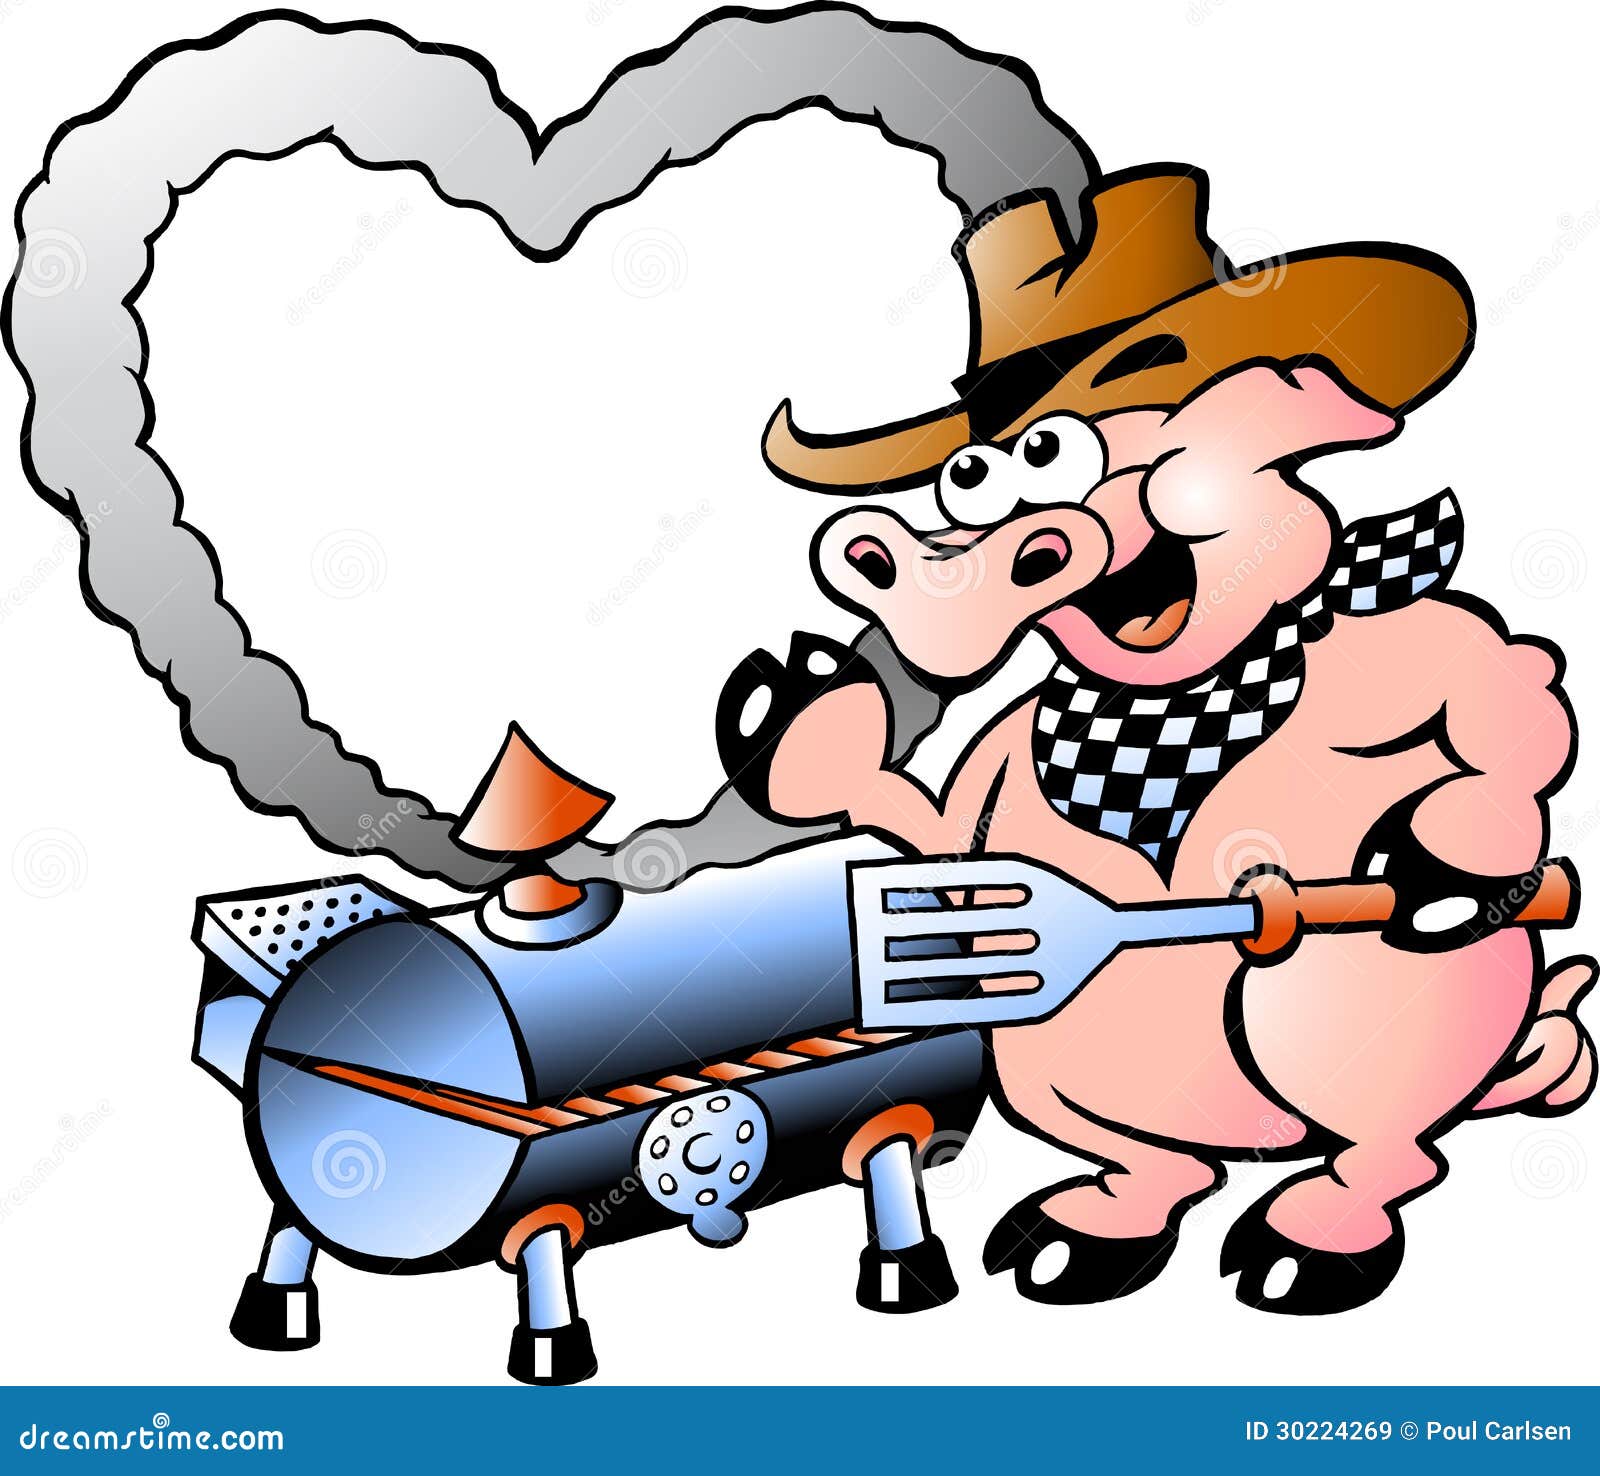 pig grilling clipart - photo #3